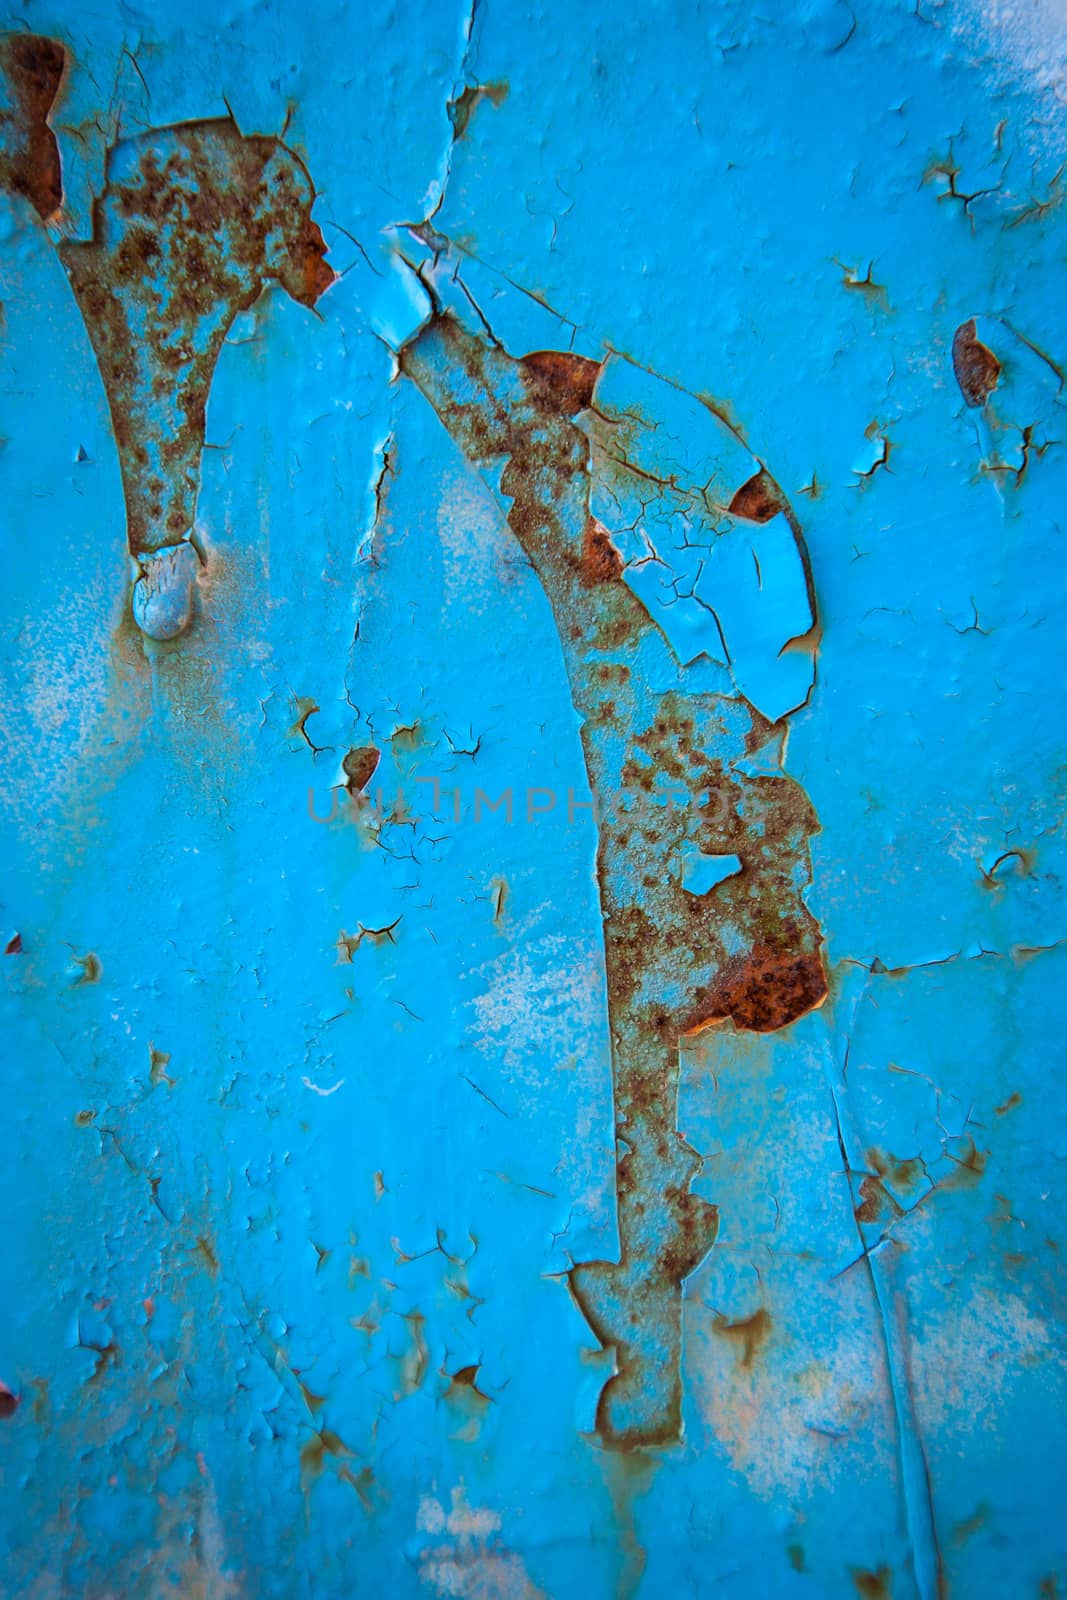 Grunge retro rusty metal close up photo , great texture,background or design element  for your projects